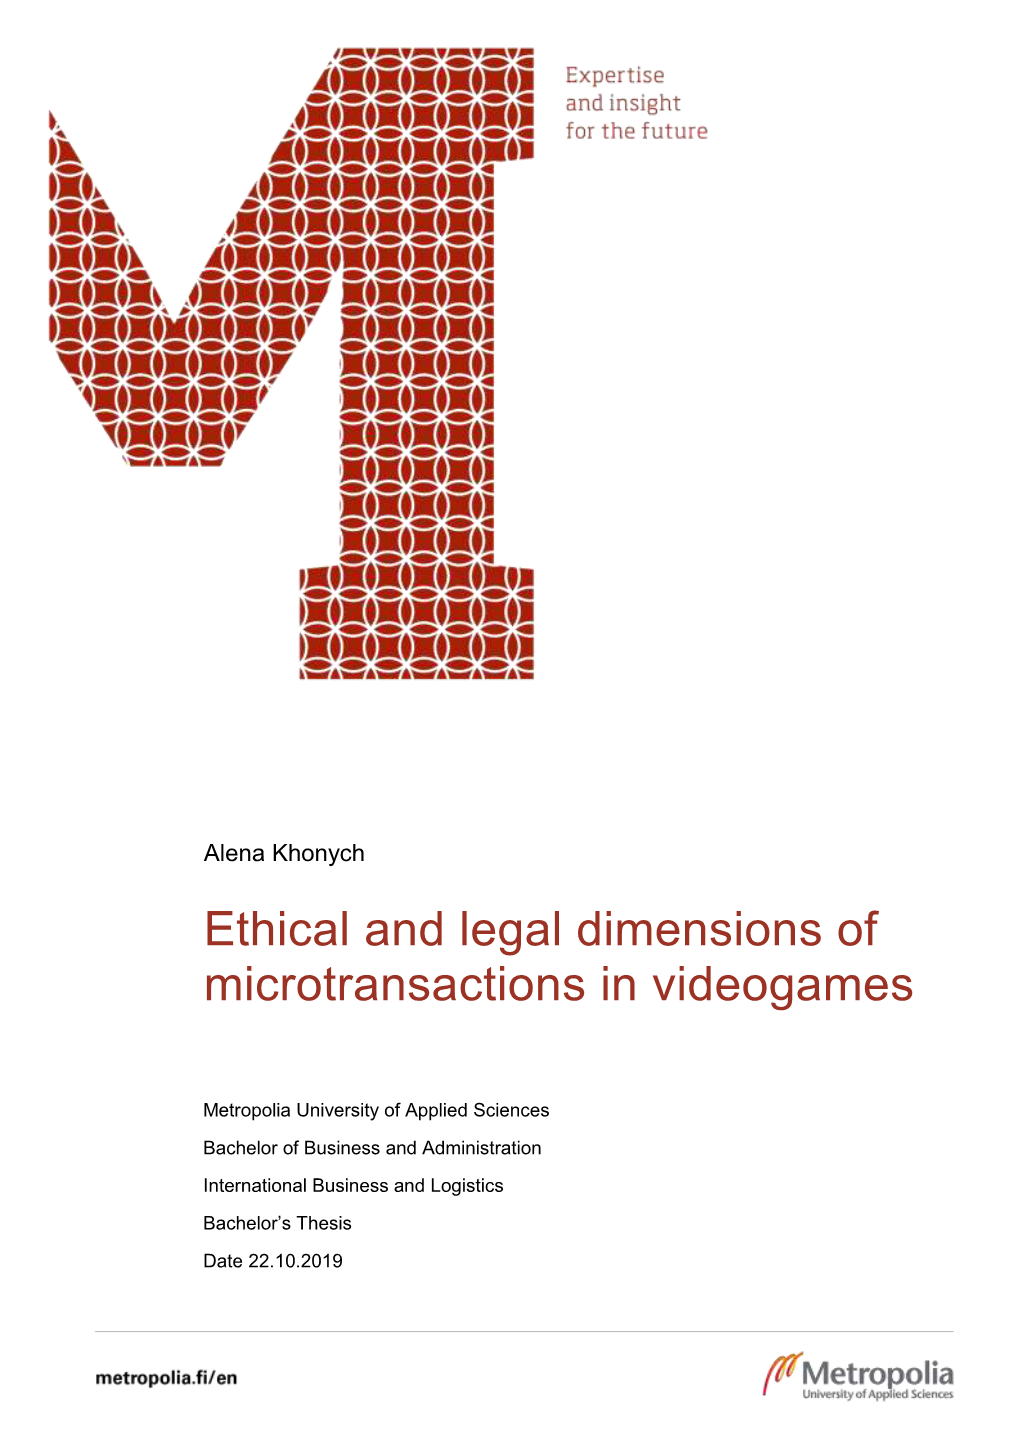 Ethical and Legal Dimensions of Microtransactions in Videogames